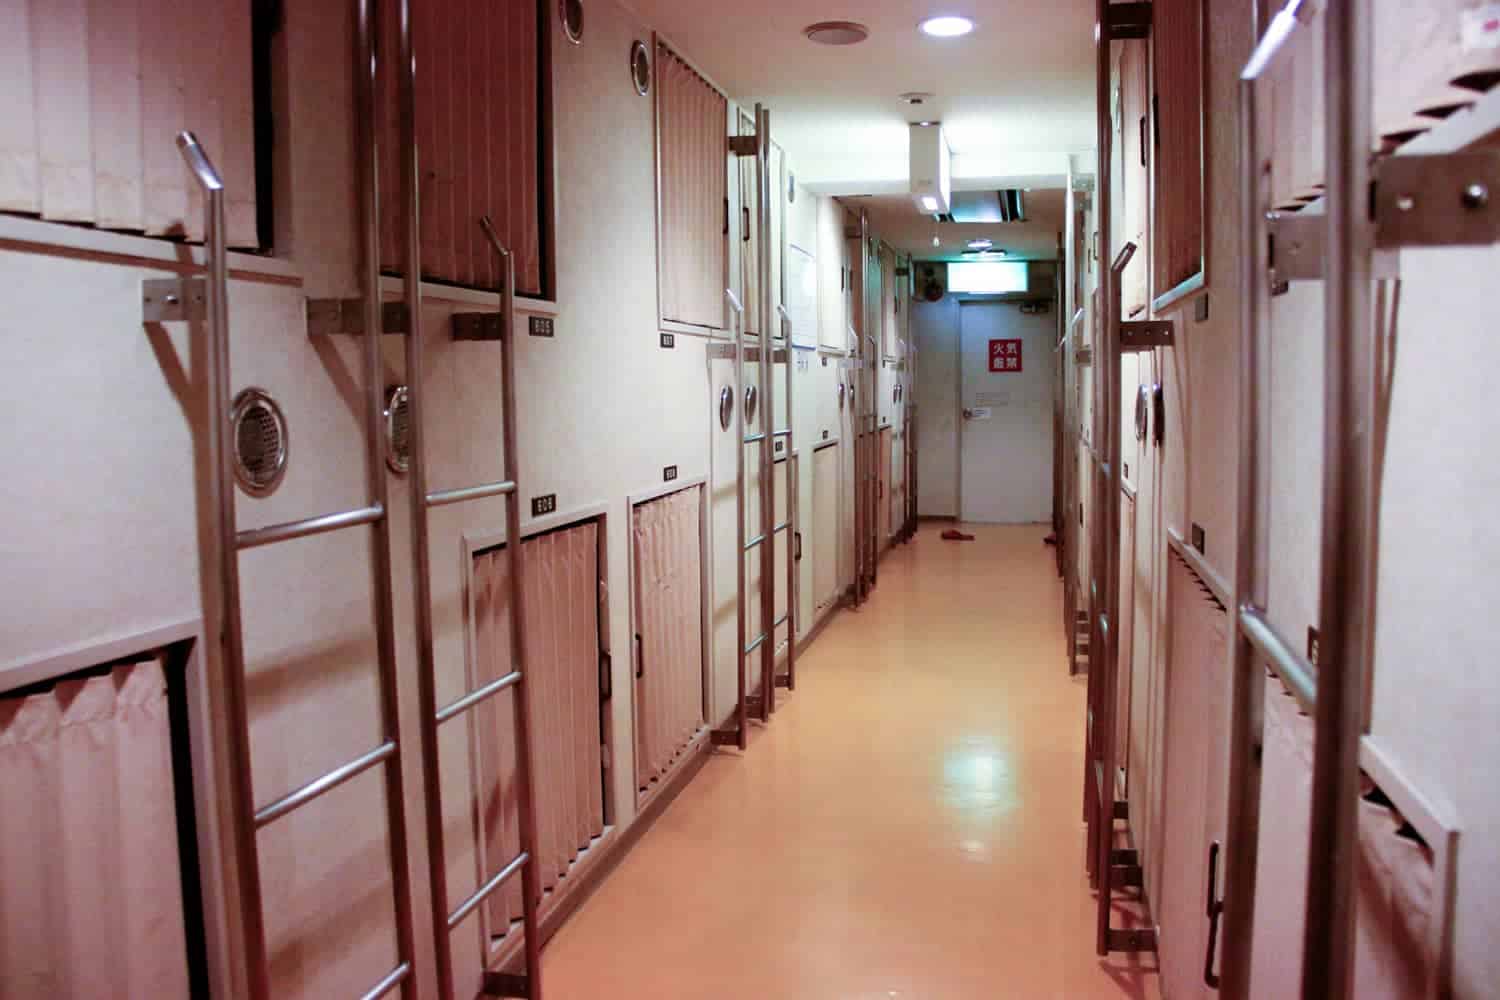 A typical corridor with box rooms either side with shutter curtains - a typical set up in a capsule hotel in Japan.